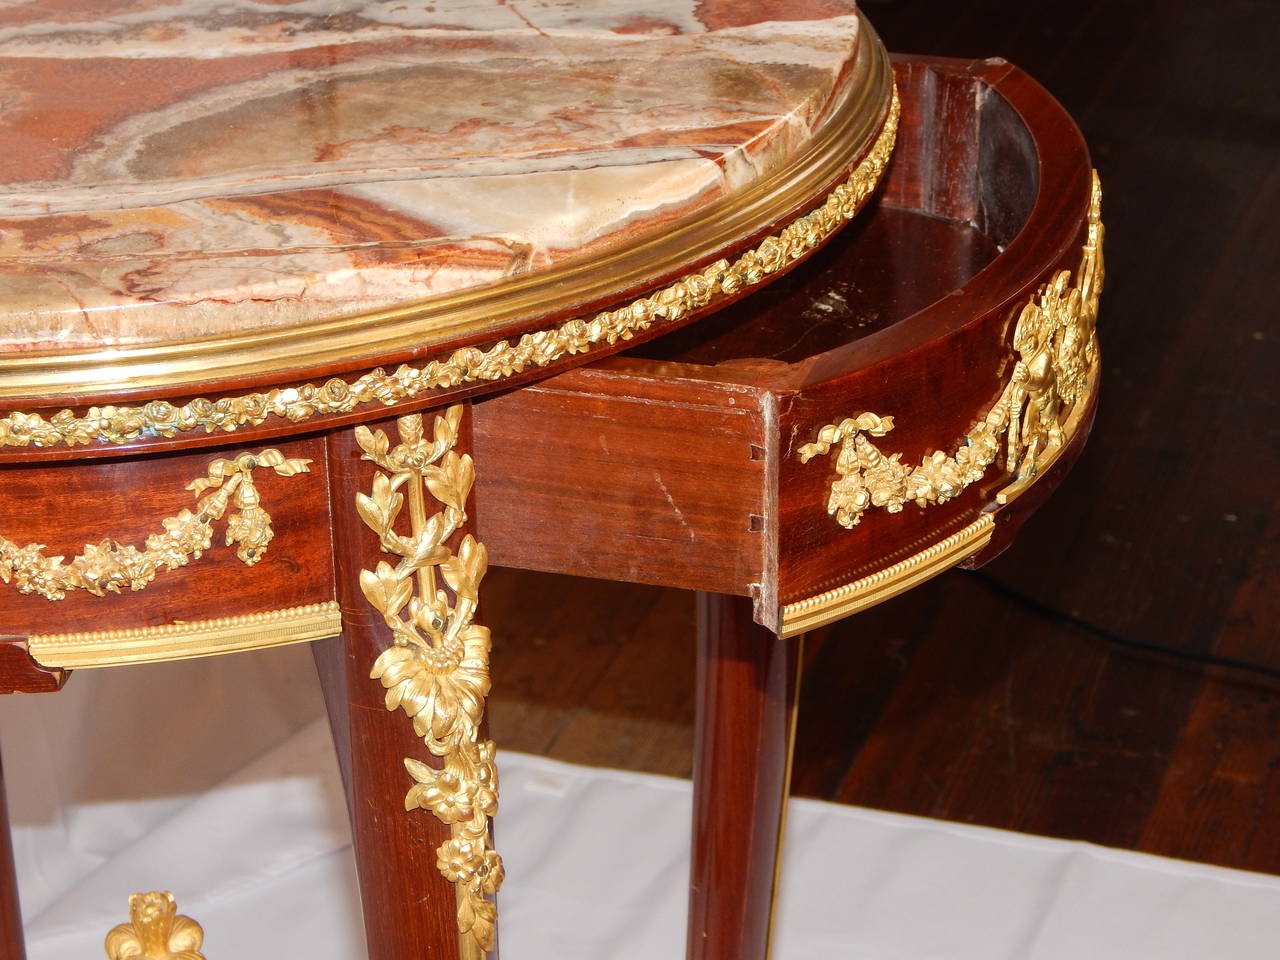 A very fine Louis XV style bronze-mounted side table, signed F. Linke, on the bronze rim, with a full stretcher and an exotic marble top.
The identical table is pictured in Christoper Payne's book, Francois Linke, The Belle Époque of French